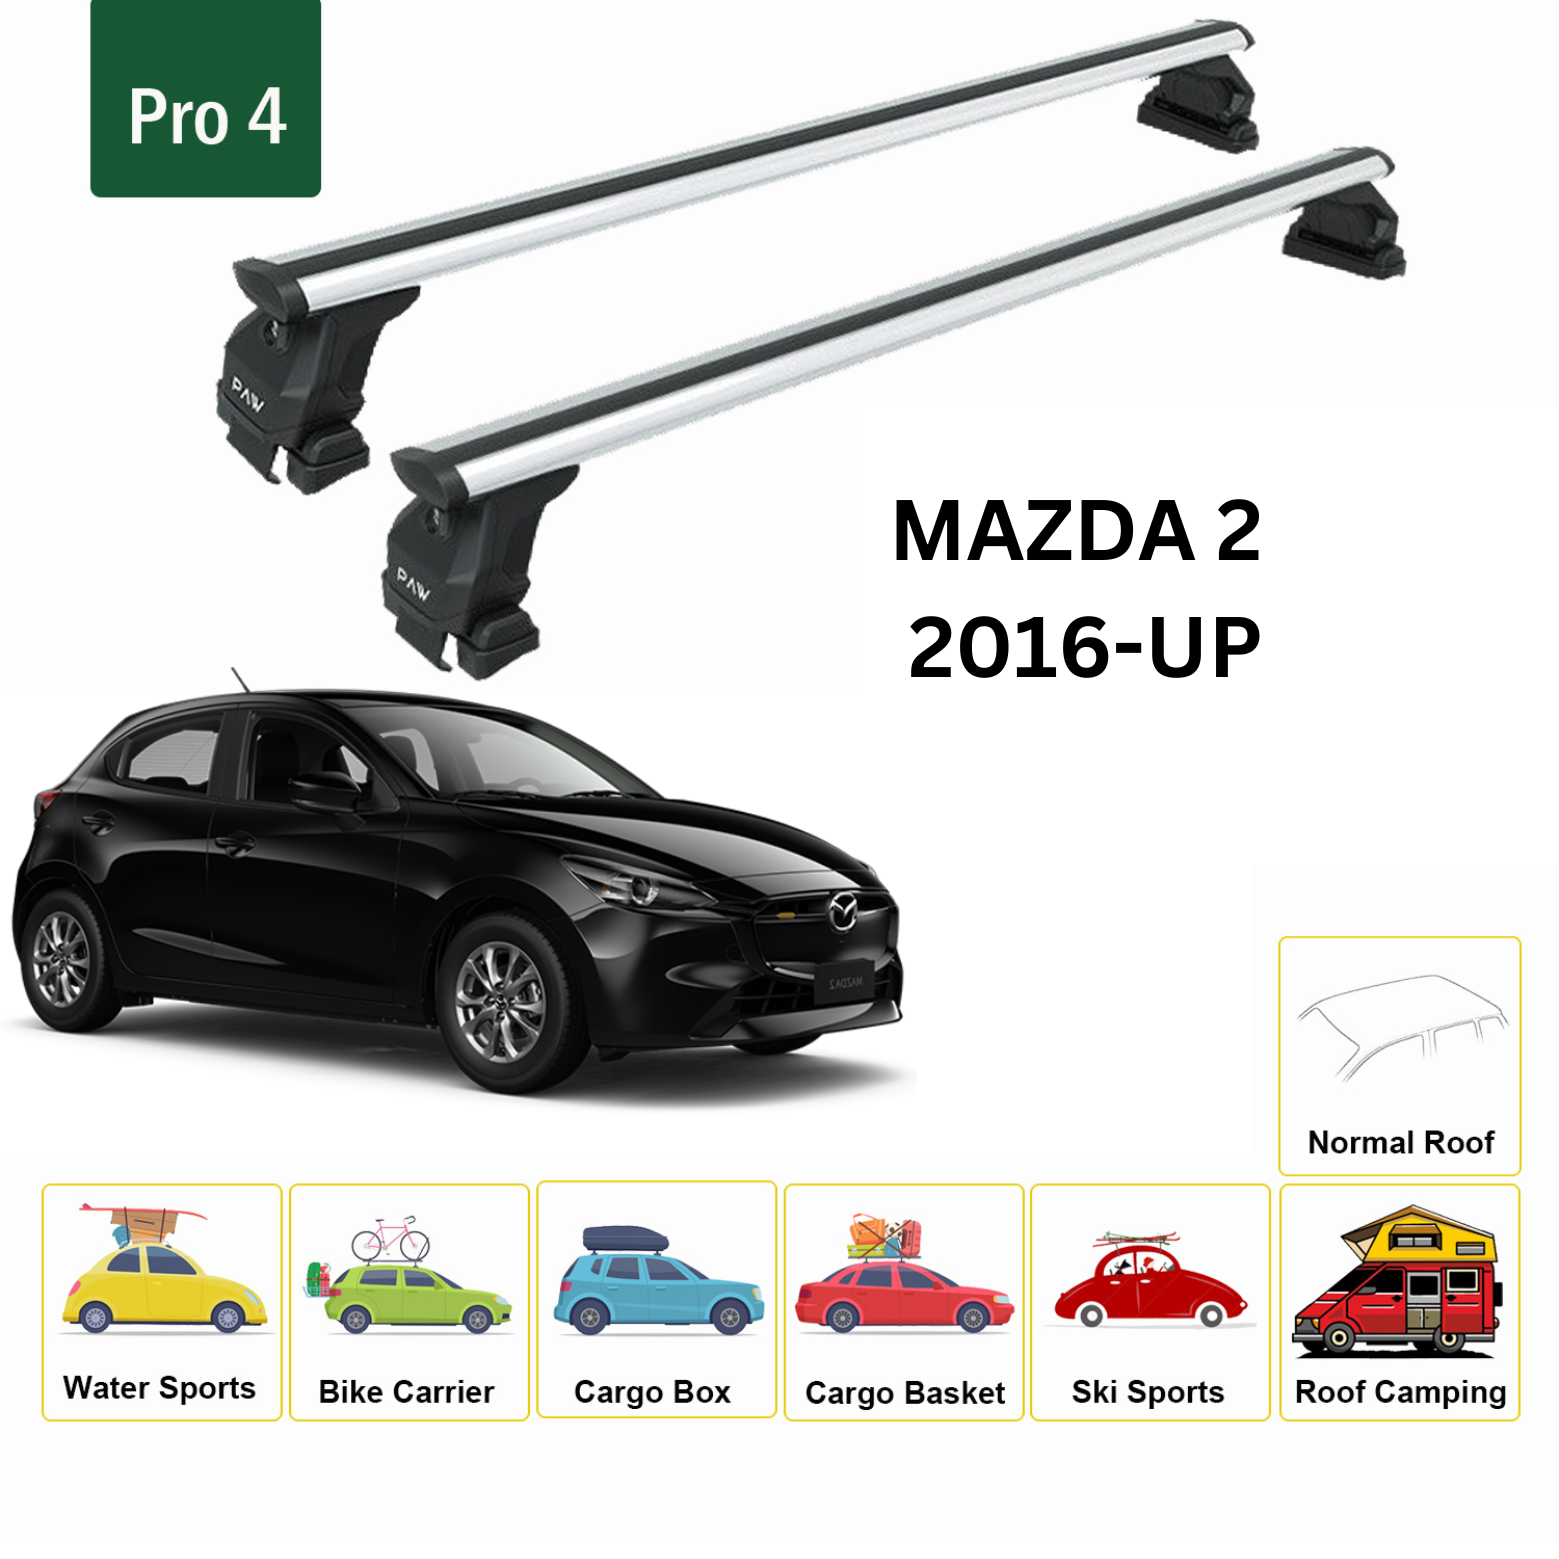 For Mazda 2 Series 2016-Up Roof Rack Cross Bars Normal Roof Alu Silver - 0